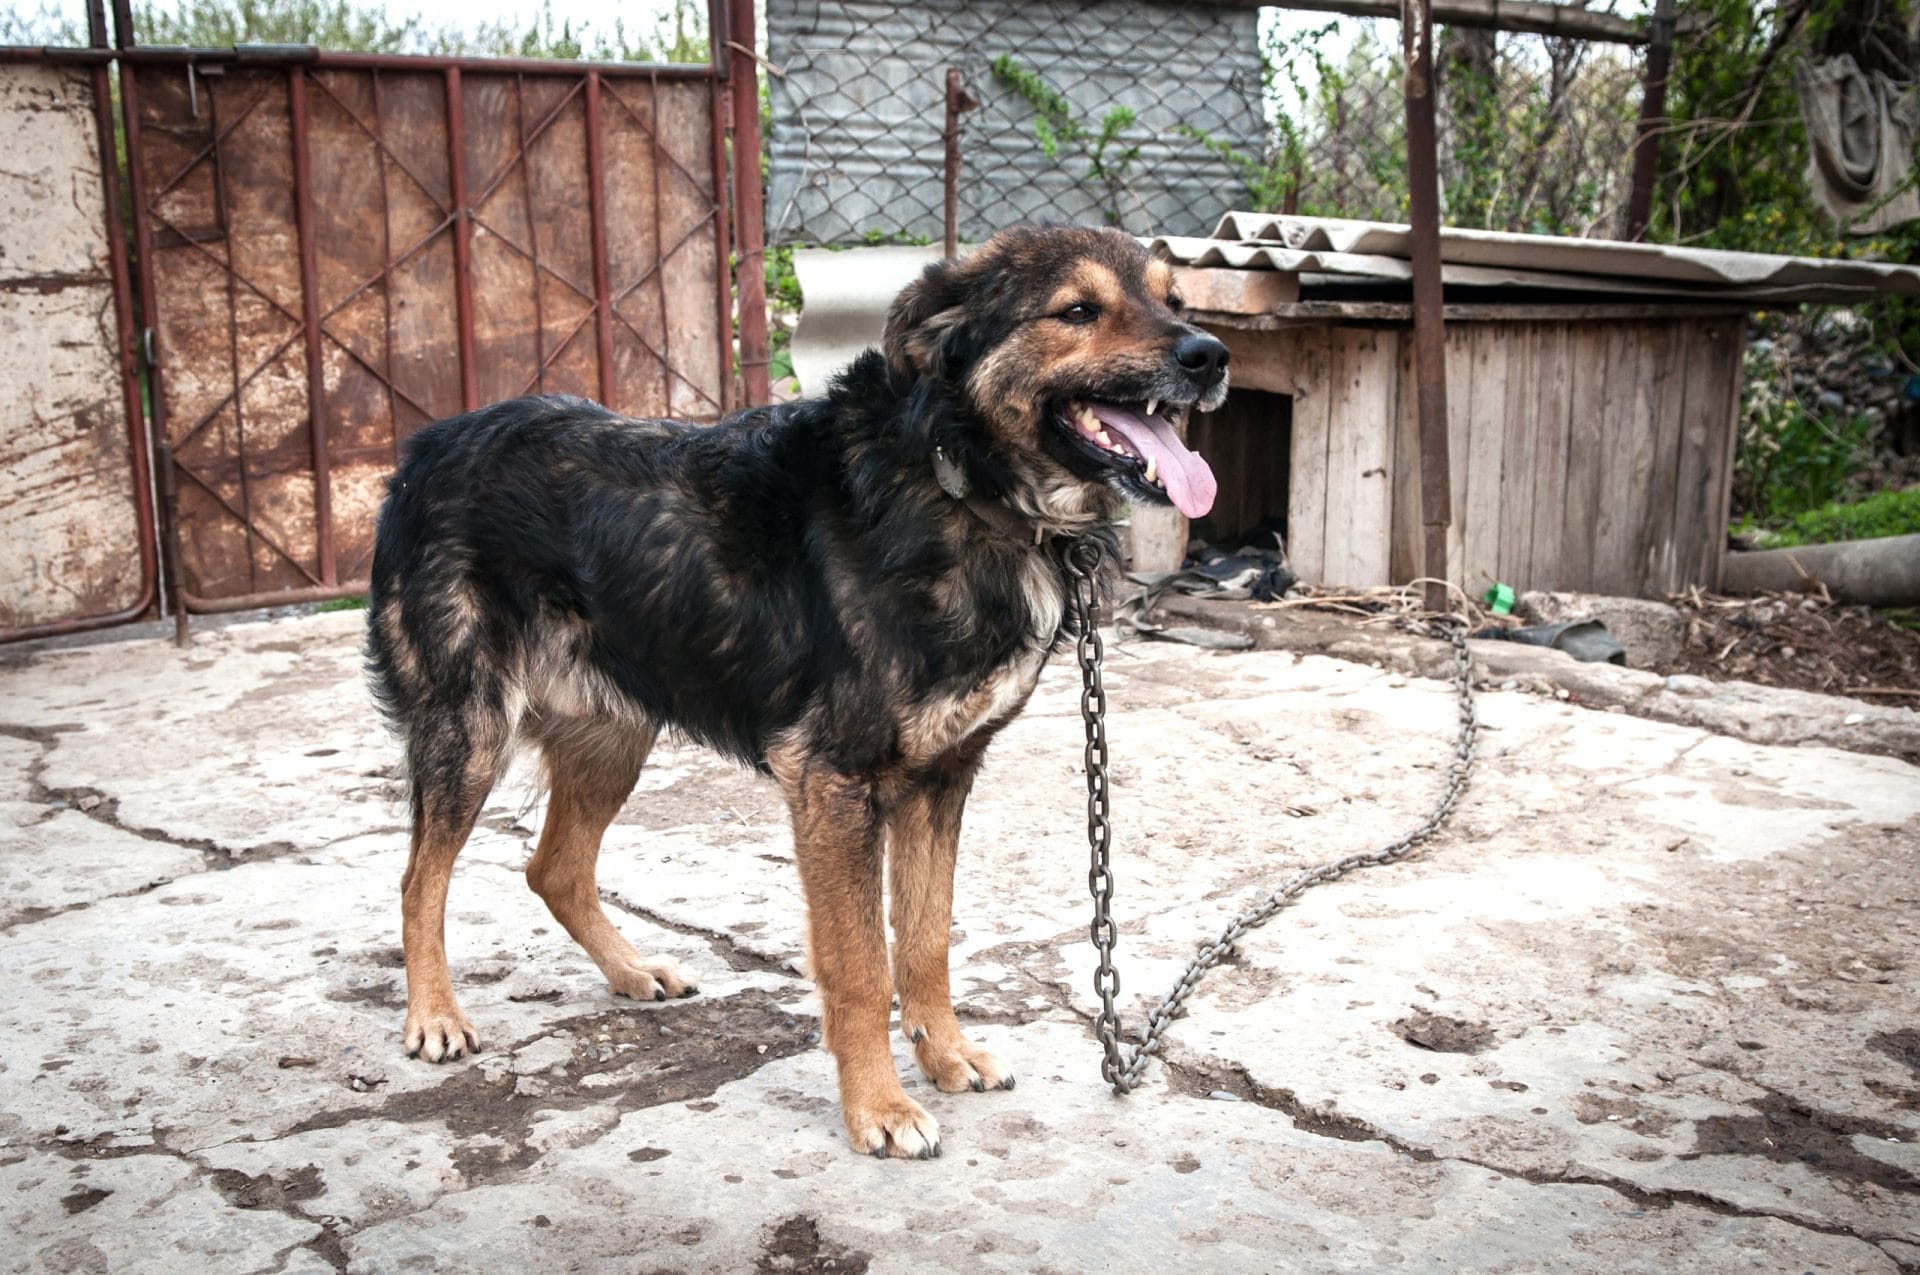 Dog tethered to a chain